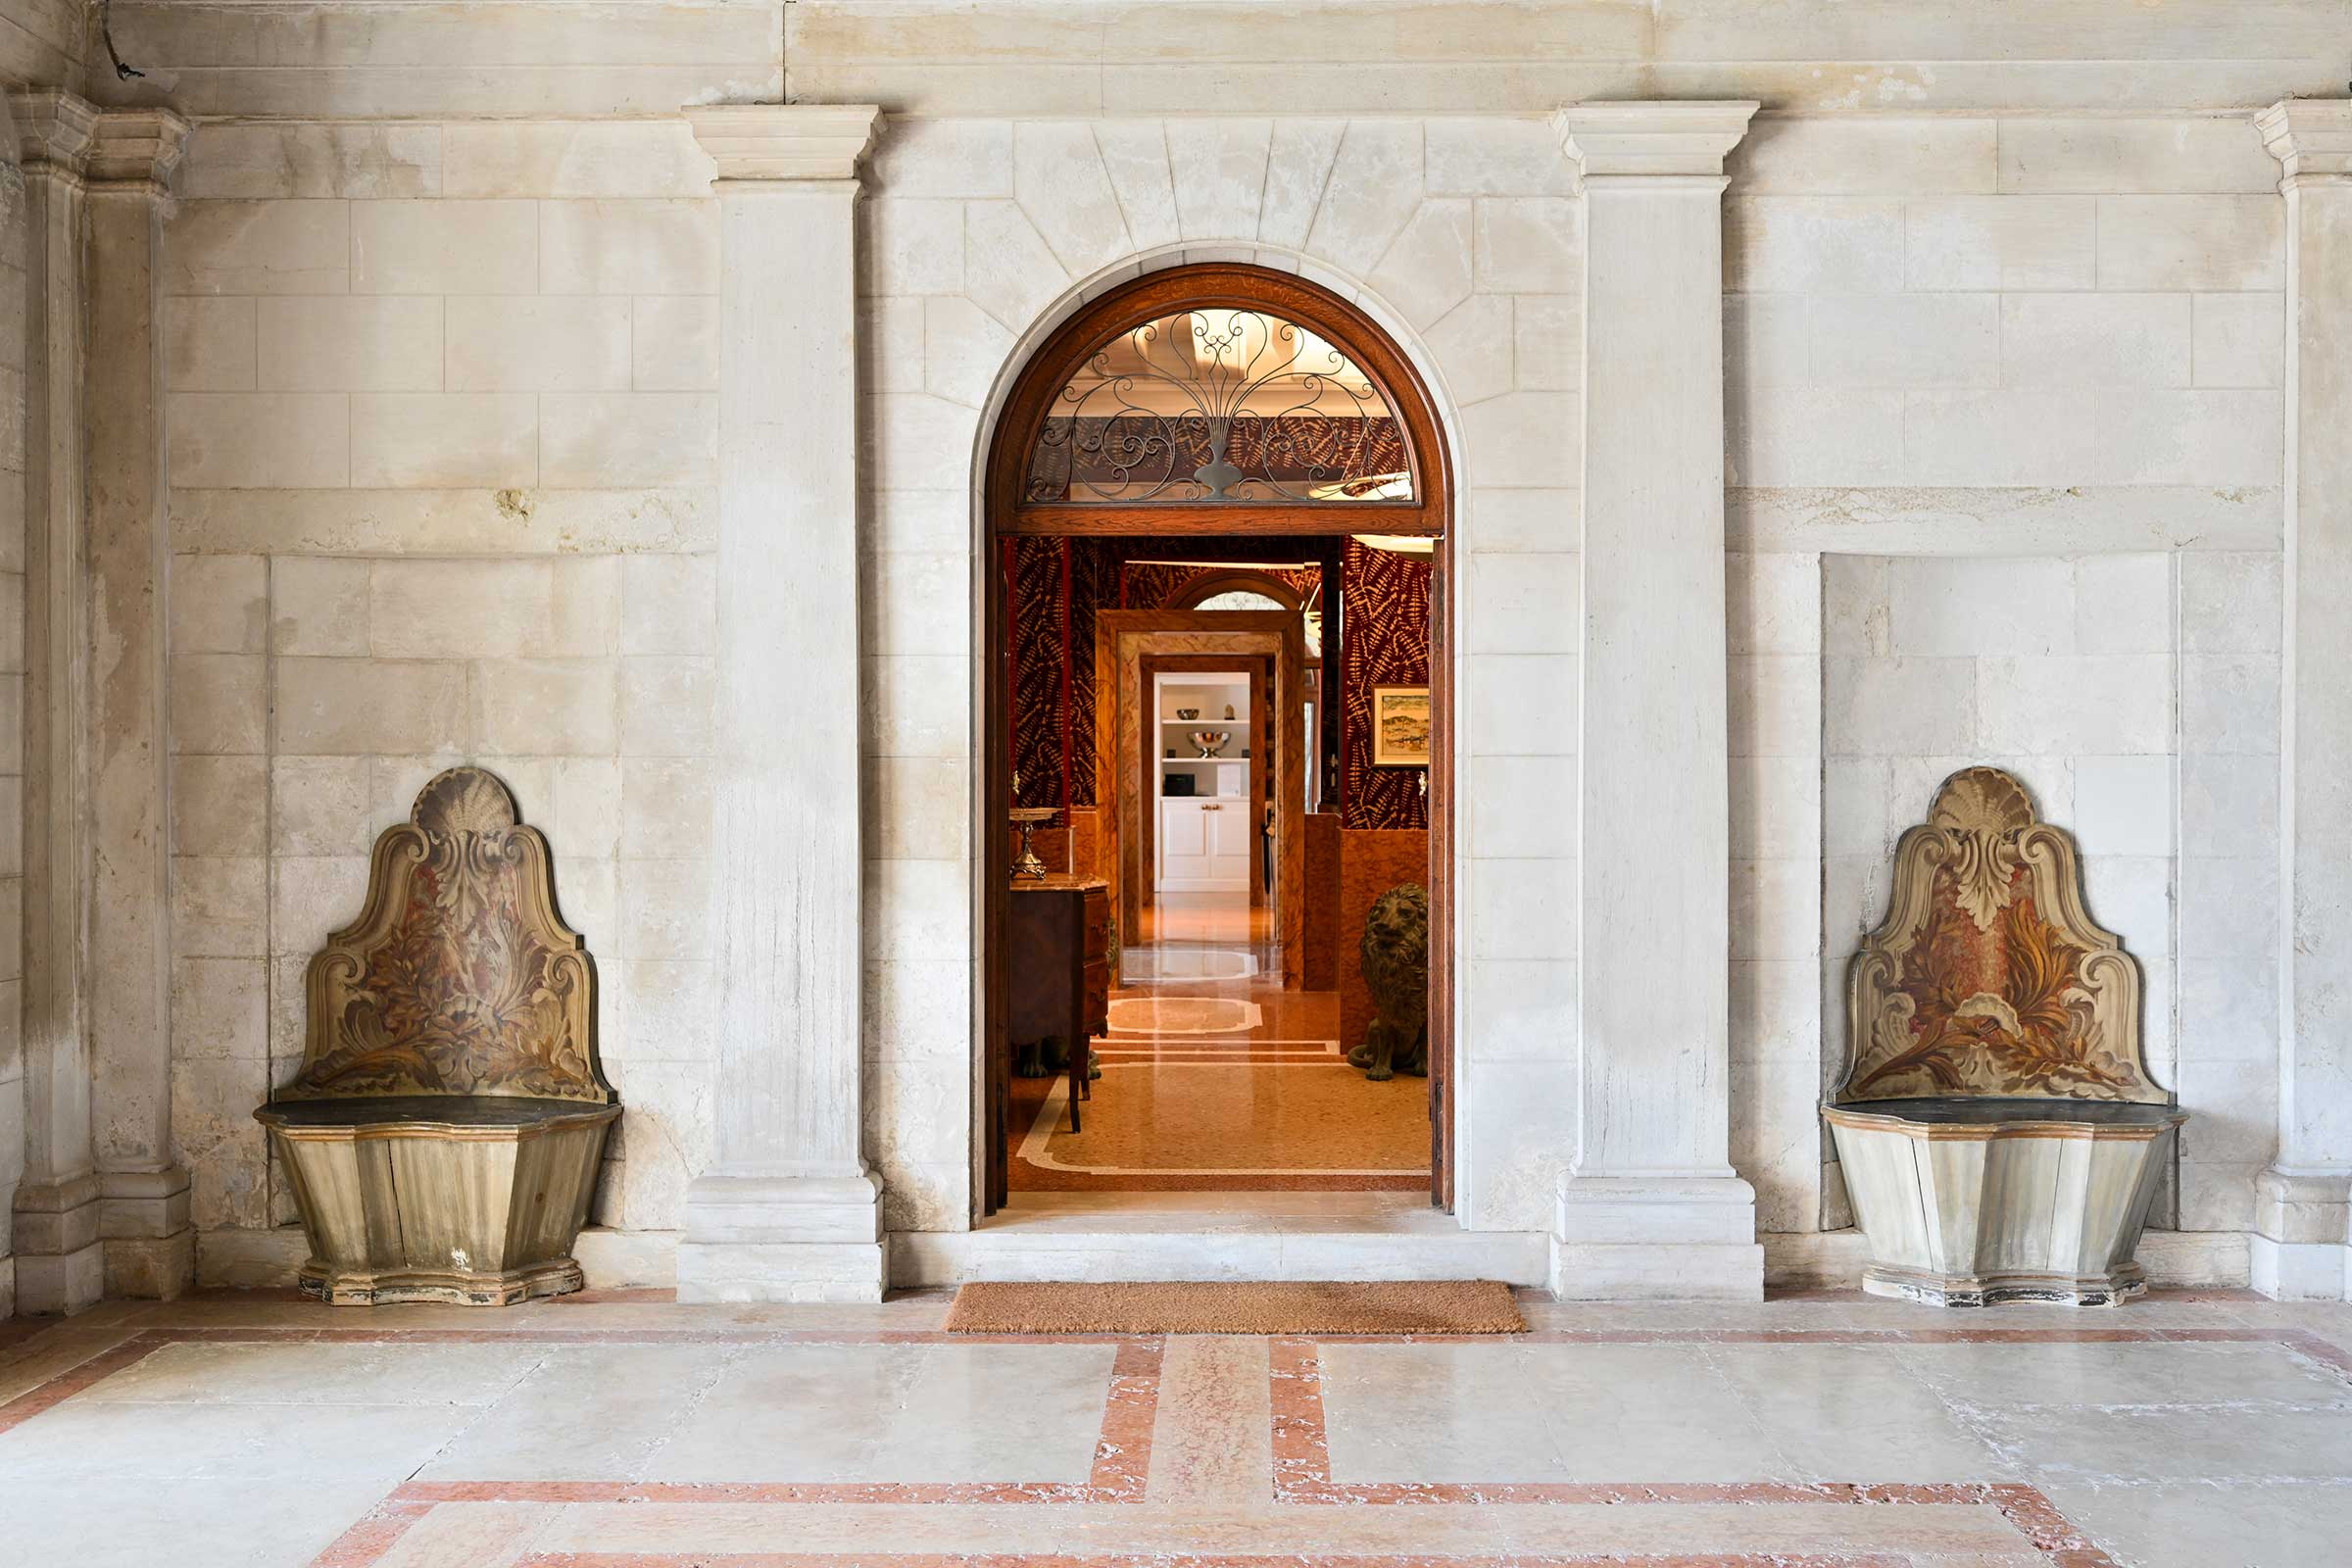 From the communal entrance hall of the Palazzo to the Dogaressa apartment door